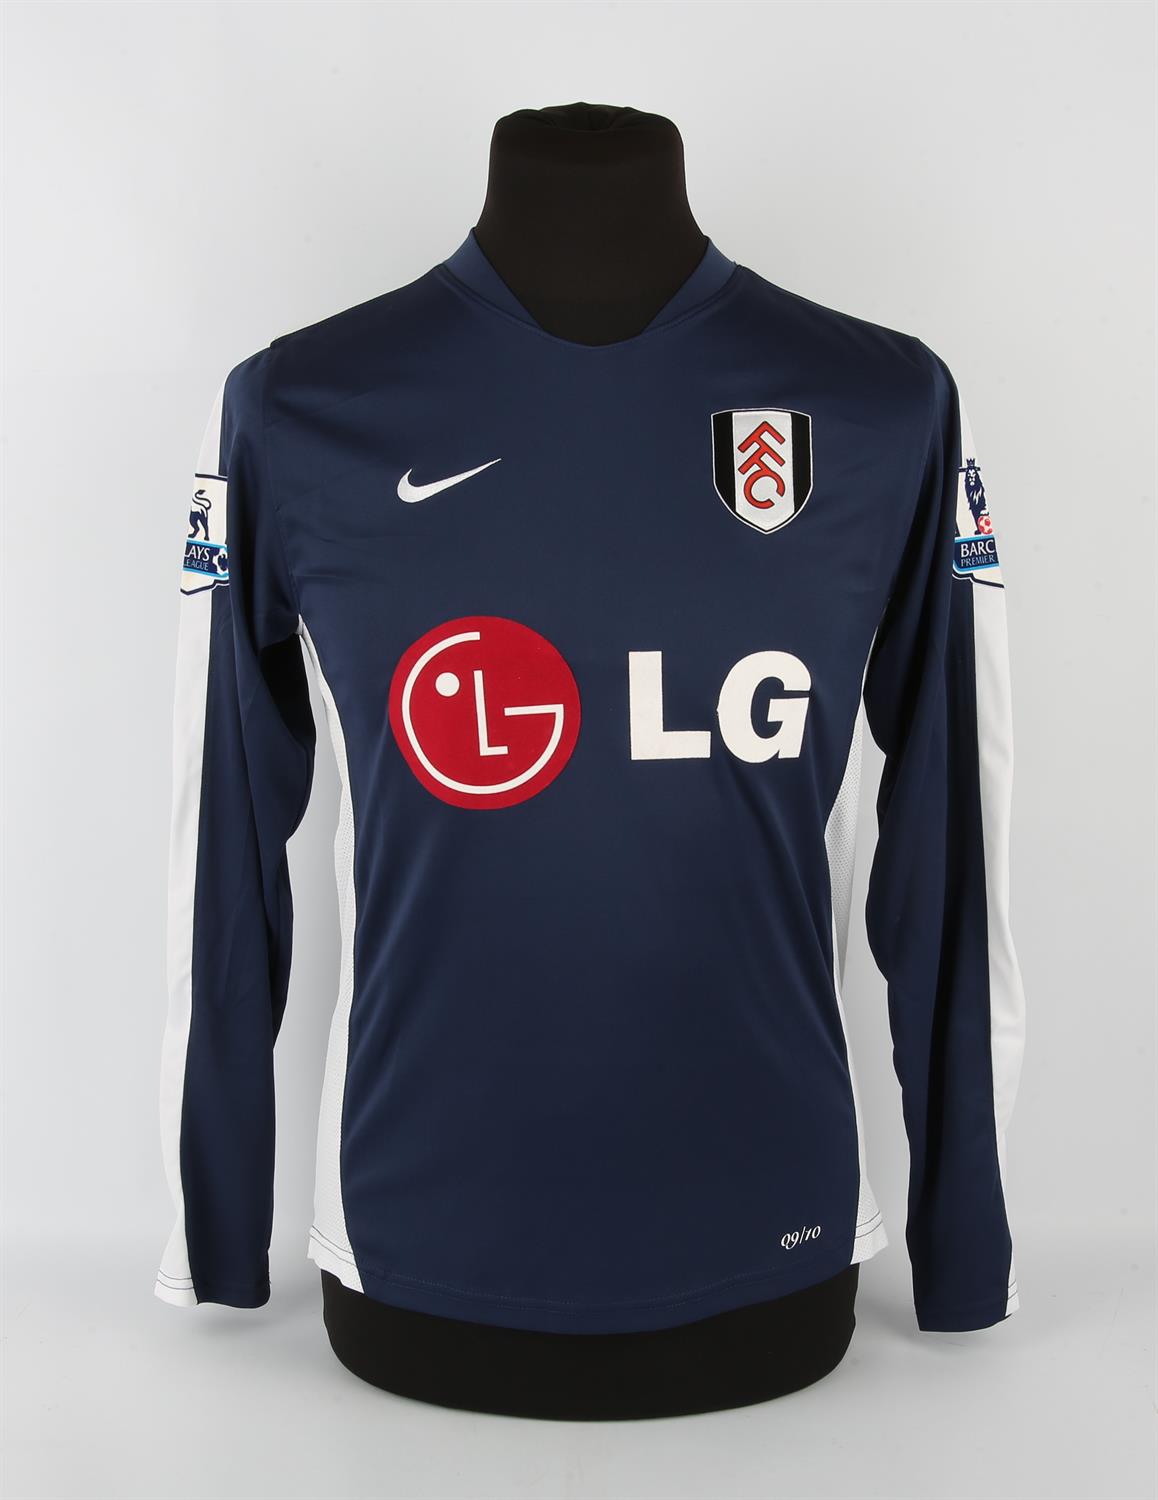 Fulham FC Football club, Simon Davies (No.29 - signed to friend- Peter) rare 3rd kit from 2009-2010, - Image 2 of 2